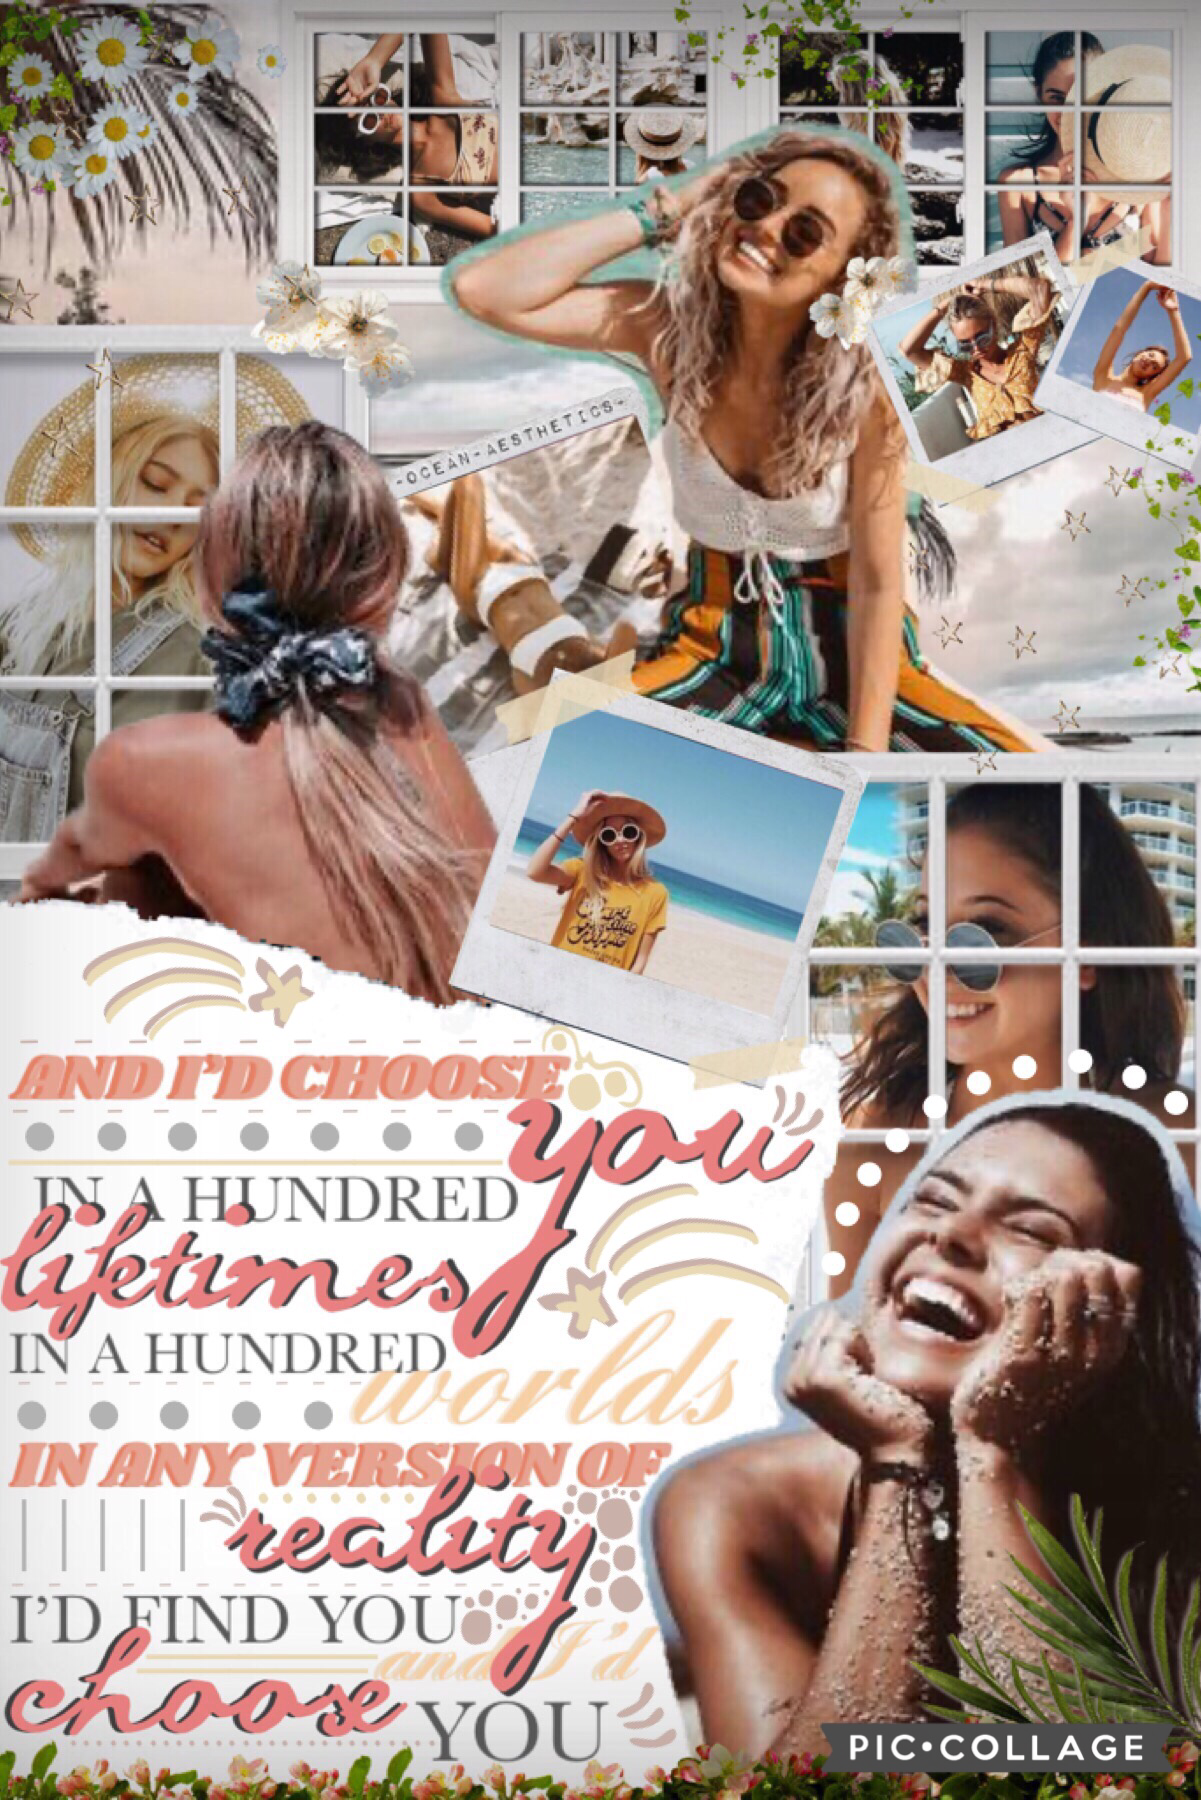 🥥-18/3/2021-🥥
Haven’t posted in a good bit but this is the first collage I’ve made in a while that I’ve actually put some effort and time into bahaha. Inspired by the lovely @meandmeonly and it’s for @babyblu3-‘s contest! Beachy? Yes. Vintage? Hm I’ll let